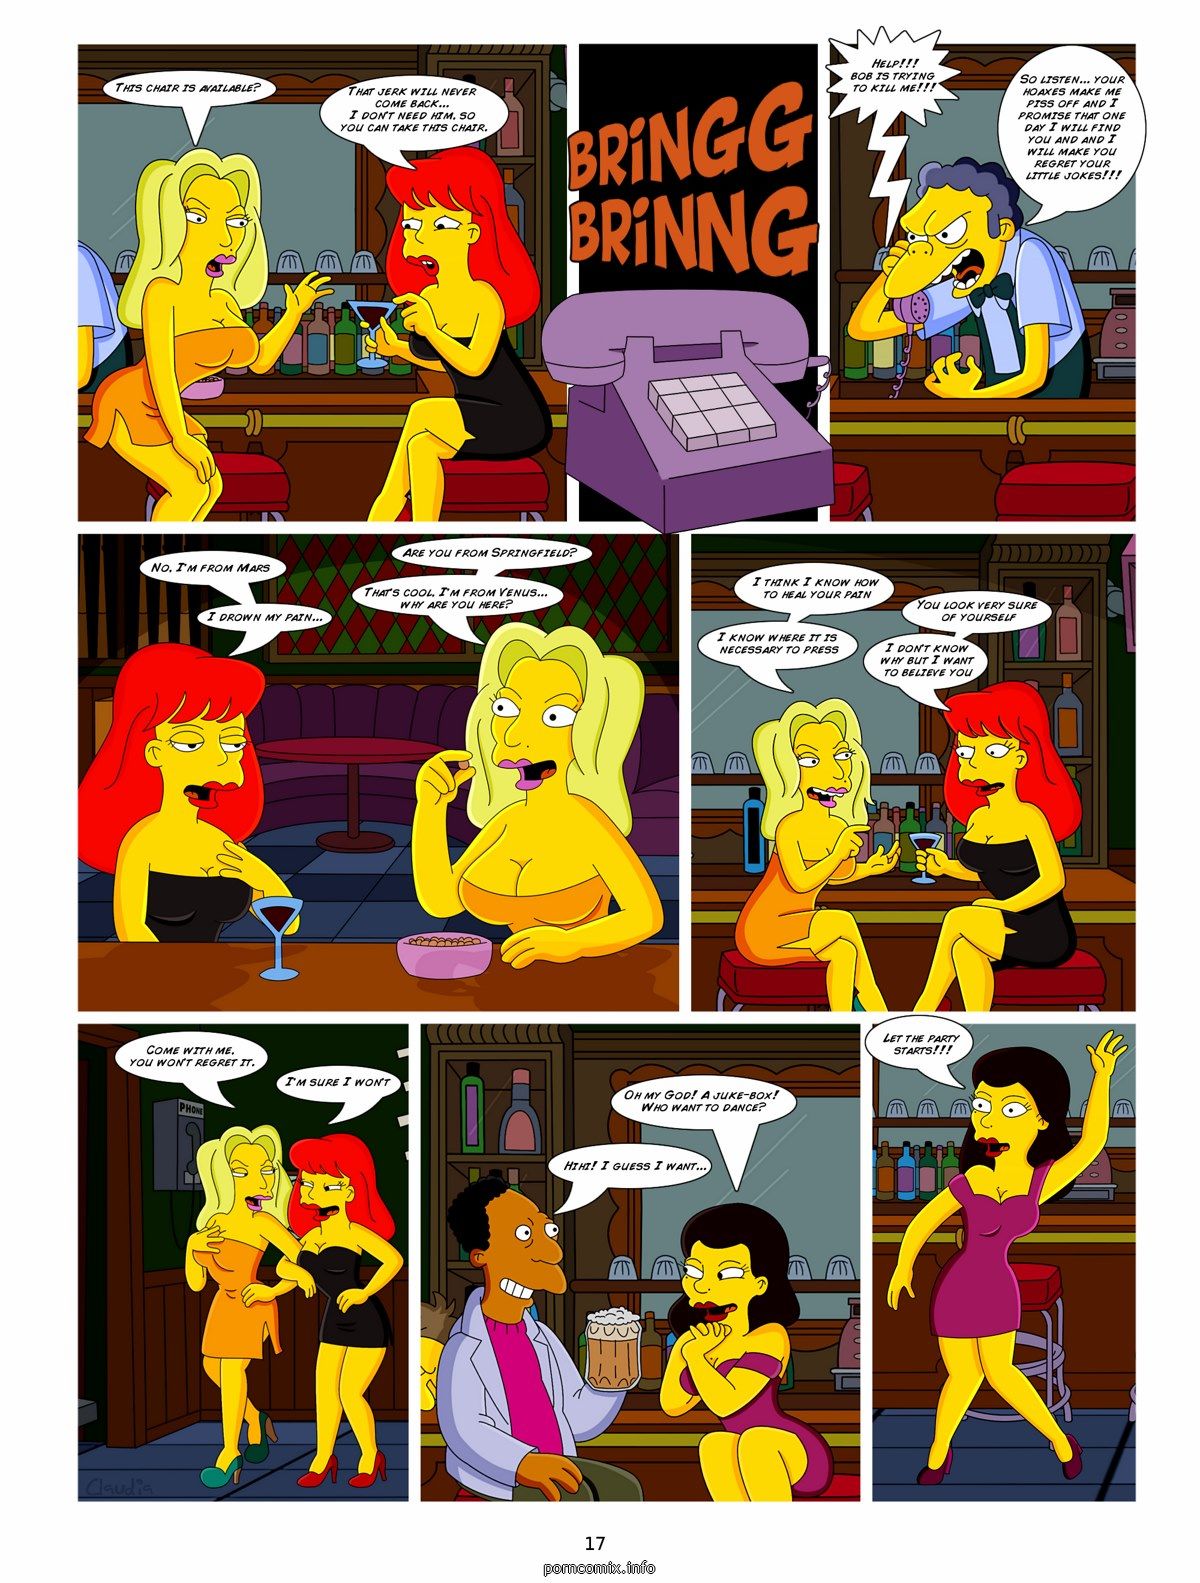 [Claudia] The Simpsons - Road To Springfield page 18